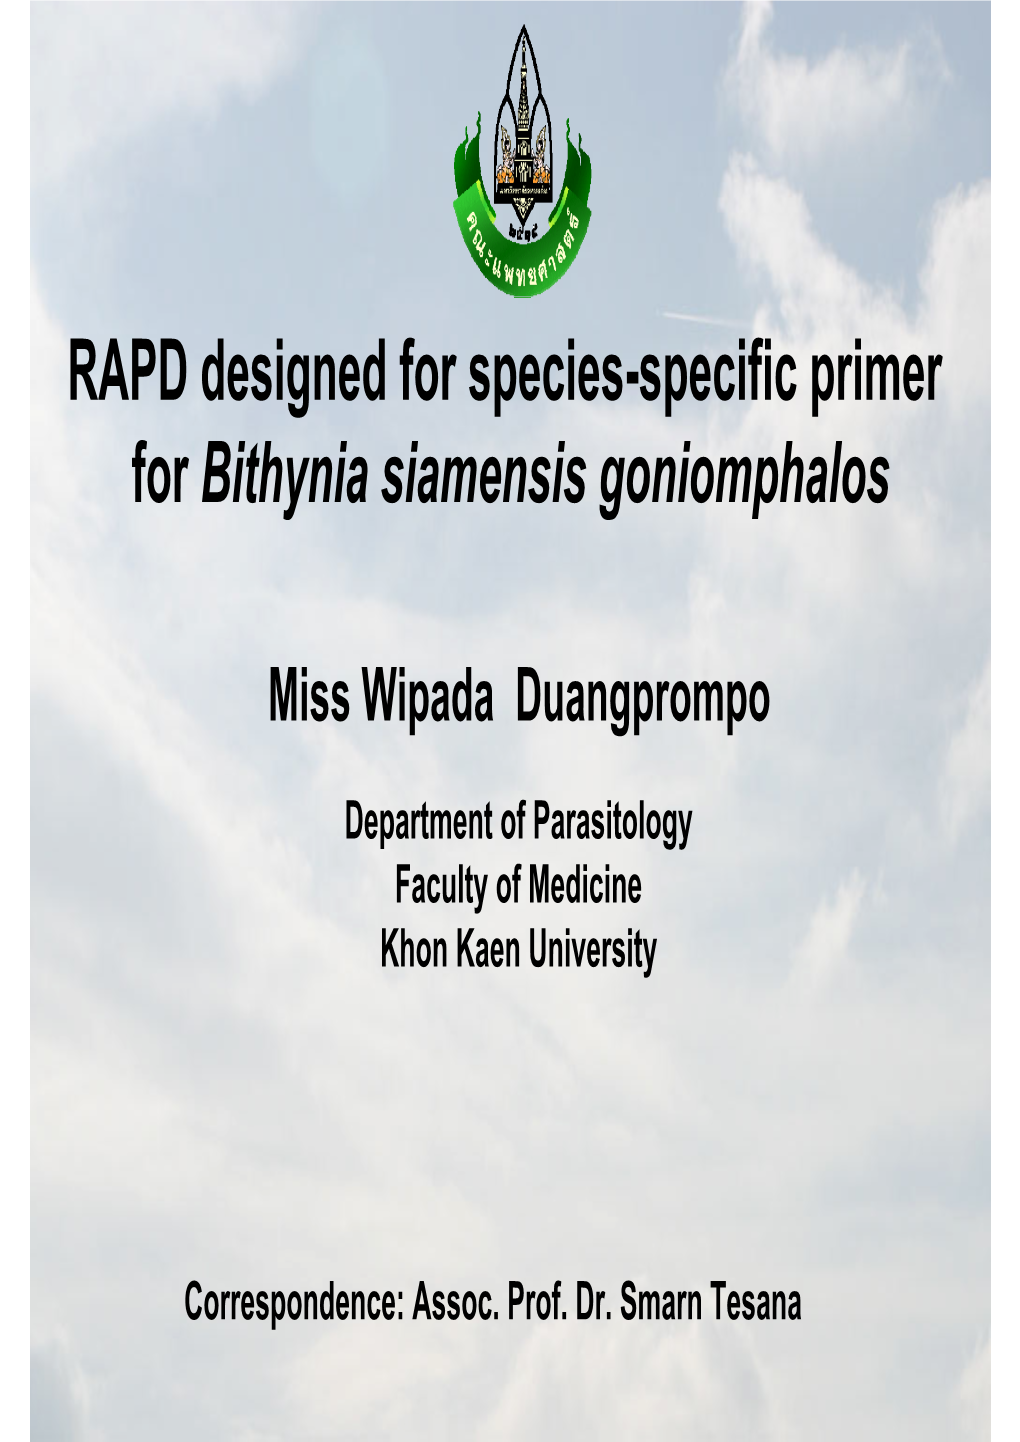 RAPD Designed for Species-Specific Primer for Bithynia Siamensis Goniomphalos